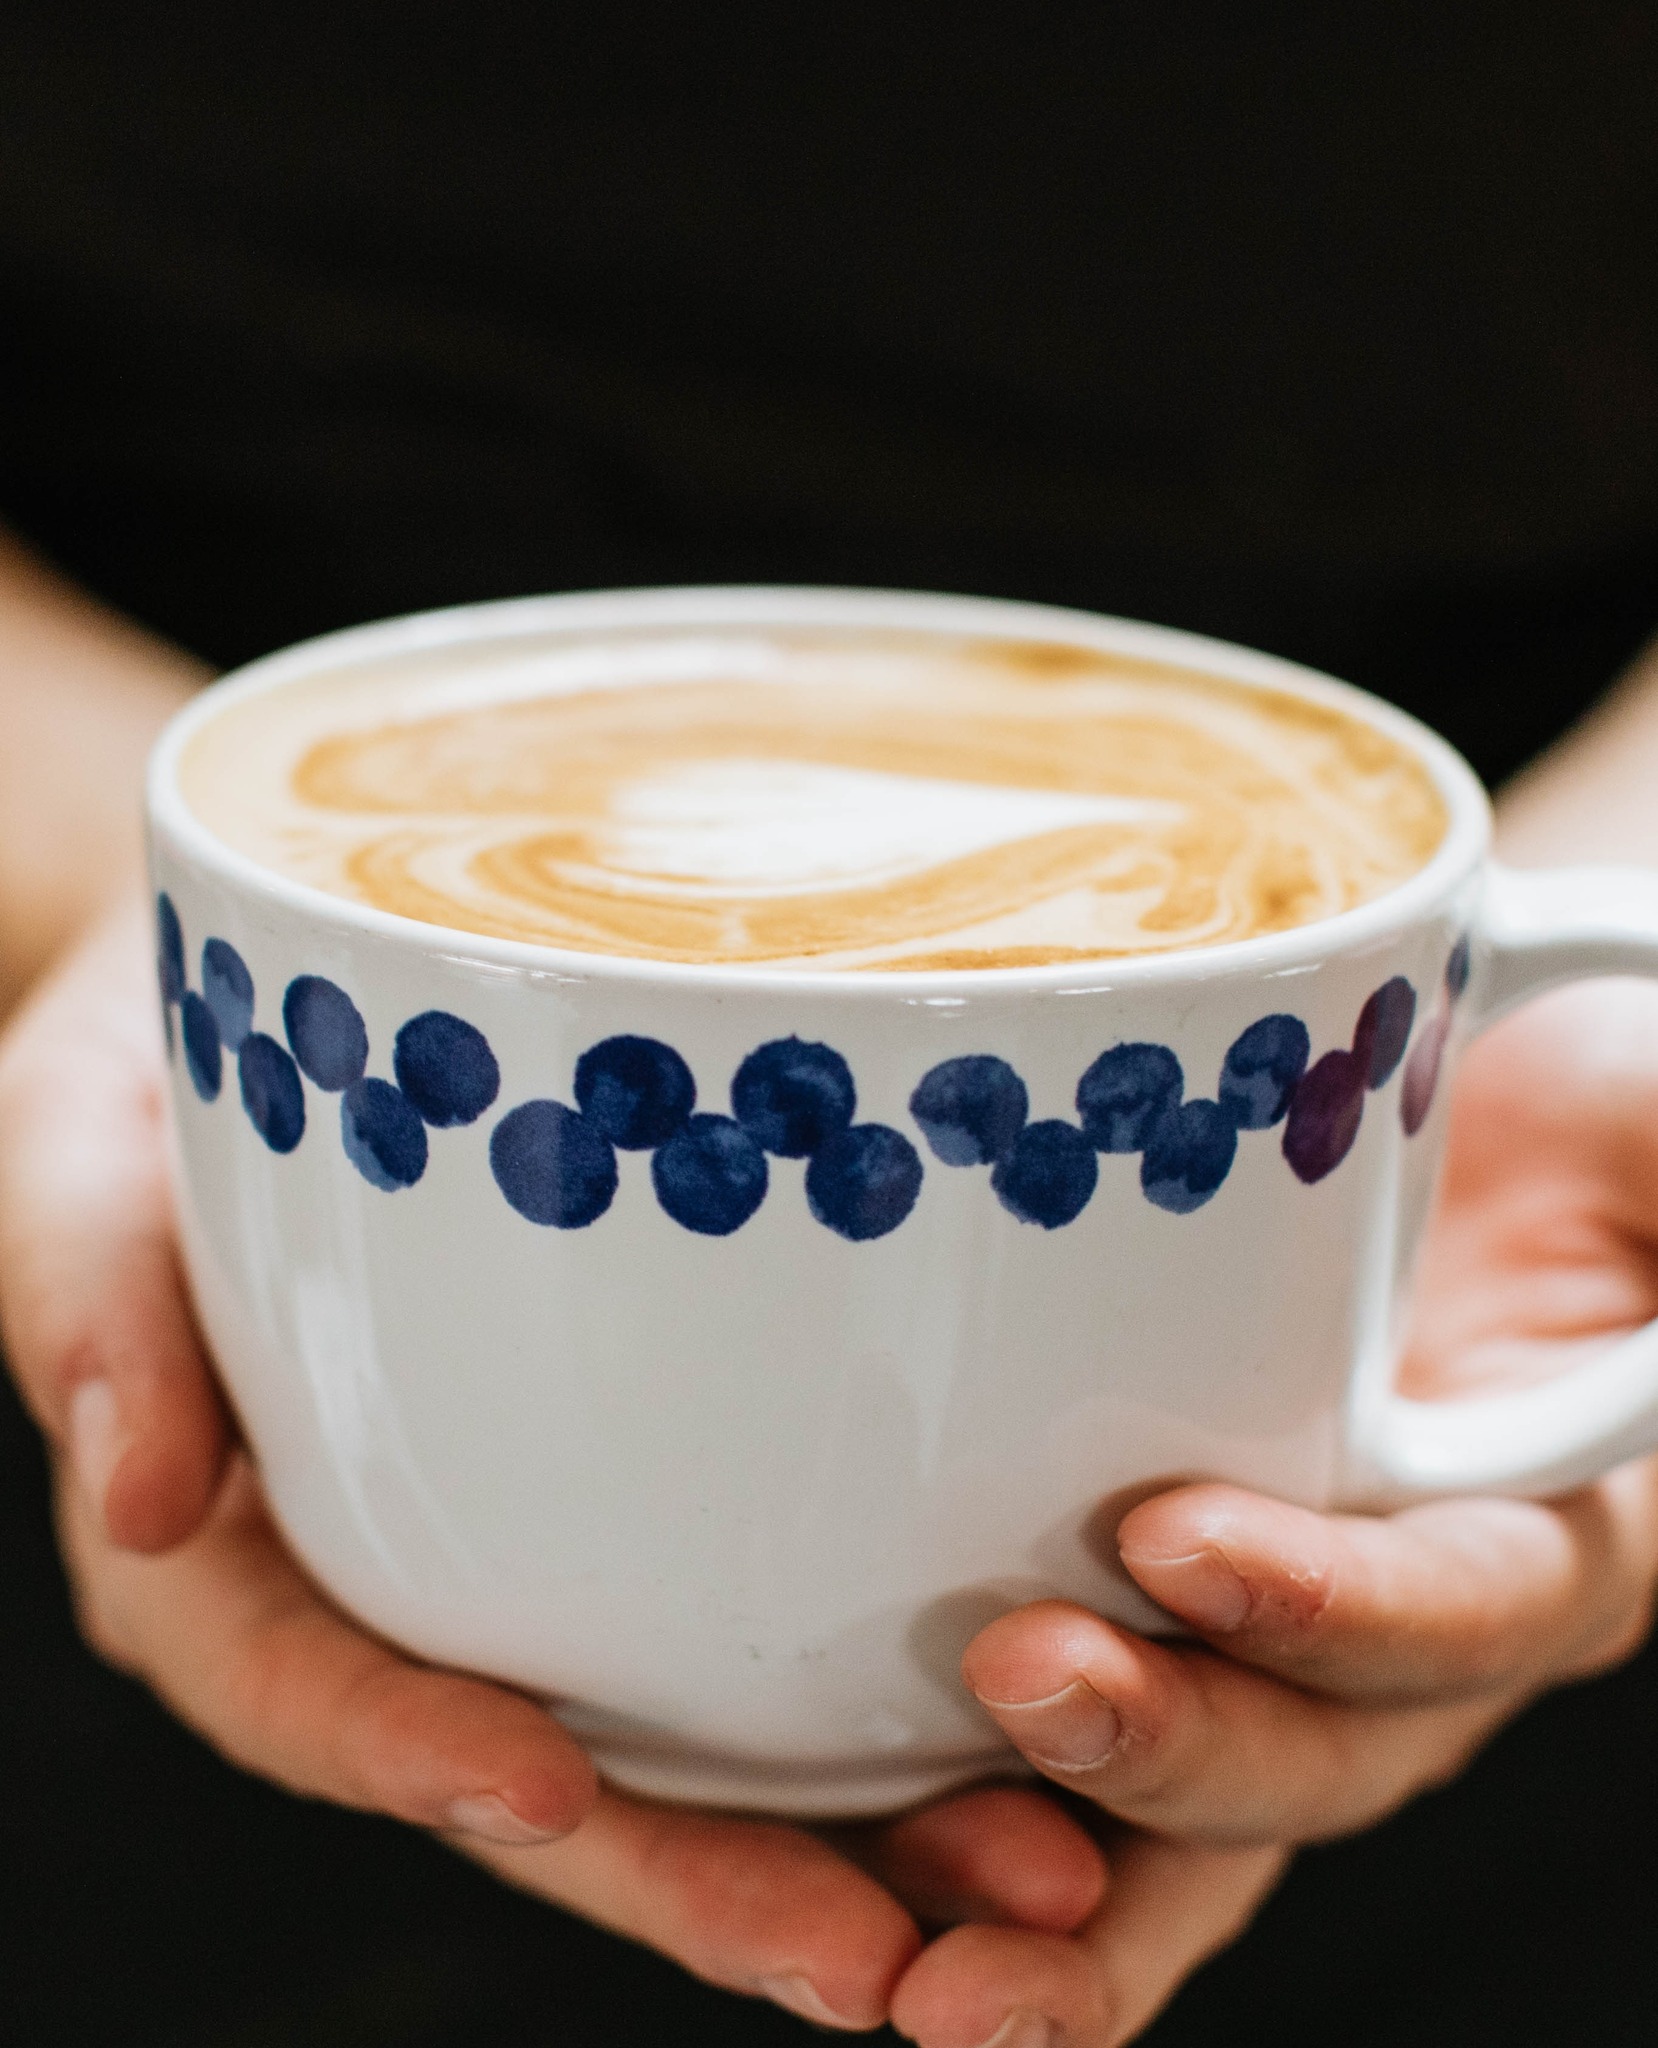 Two hands holding a latte in ceramic cup